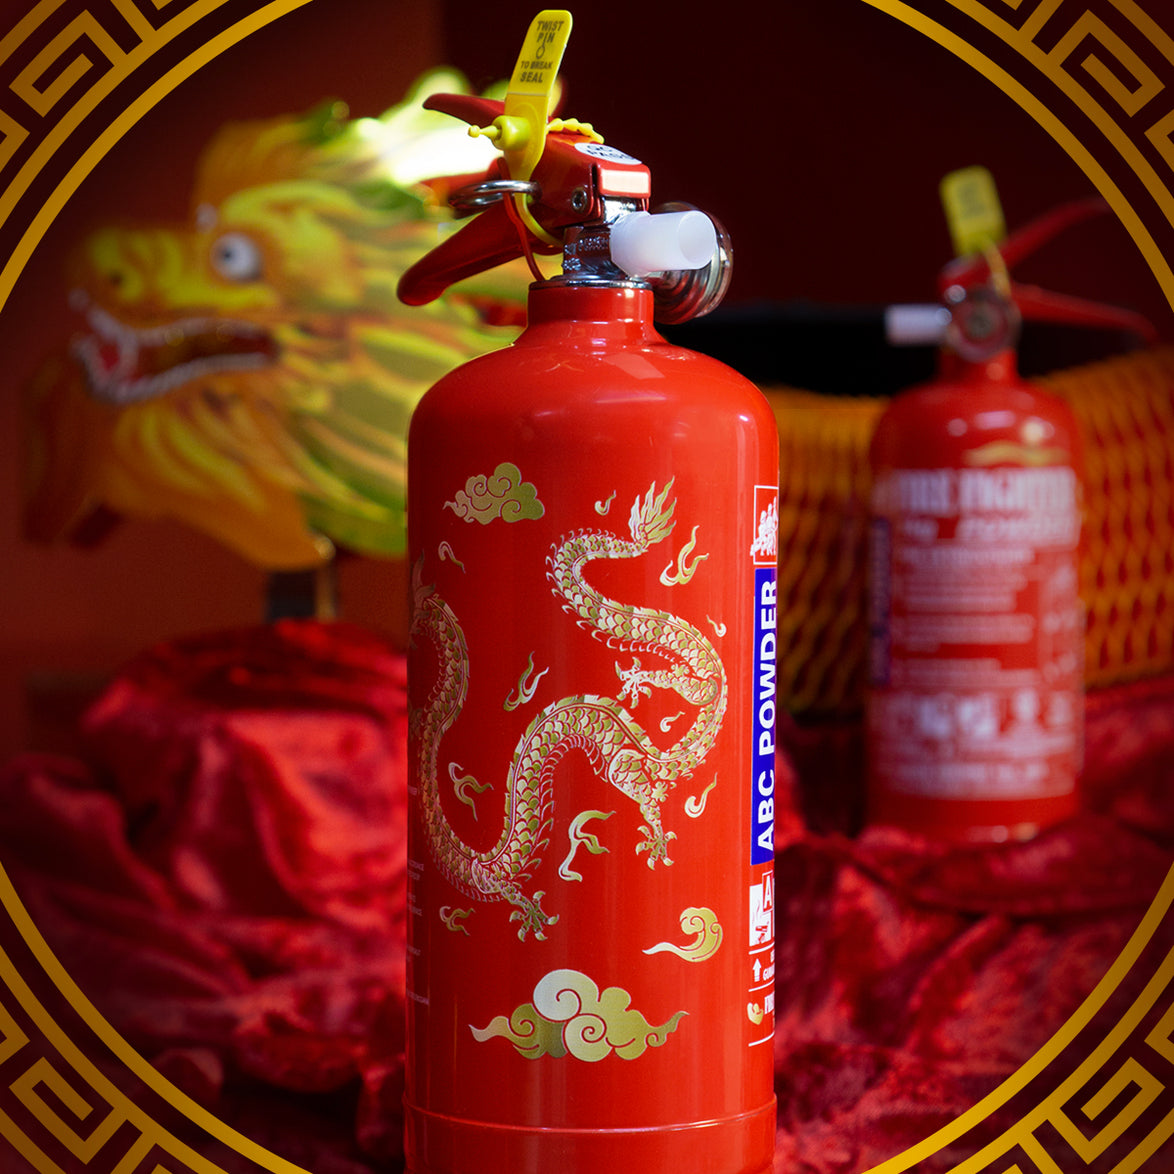 2024 Dragon Edition 1kg Red Fire Extinguisher